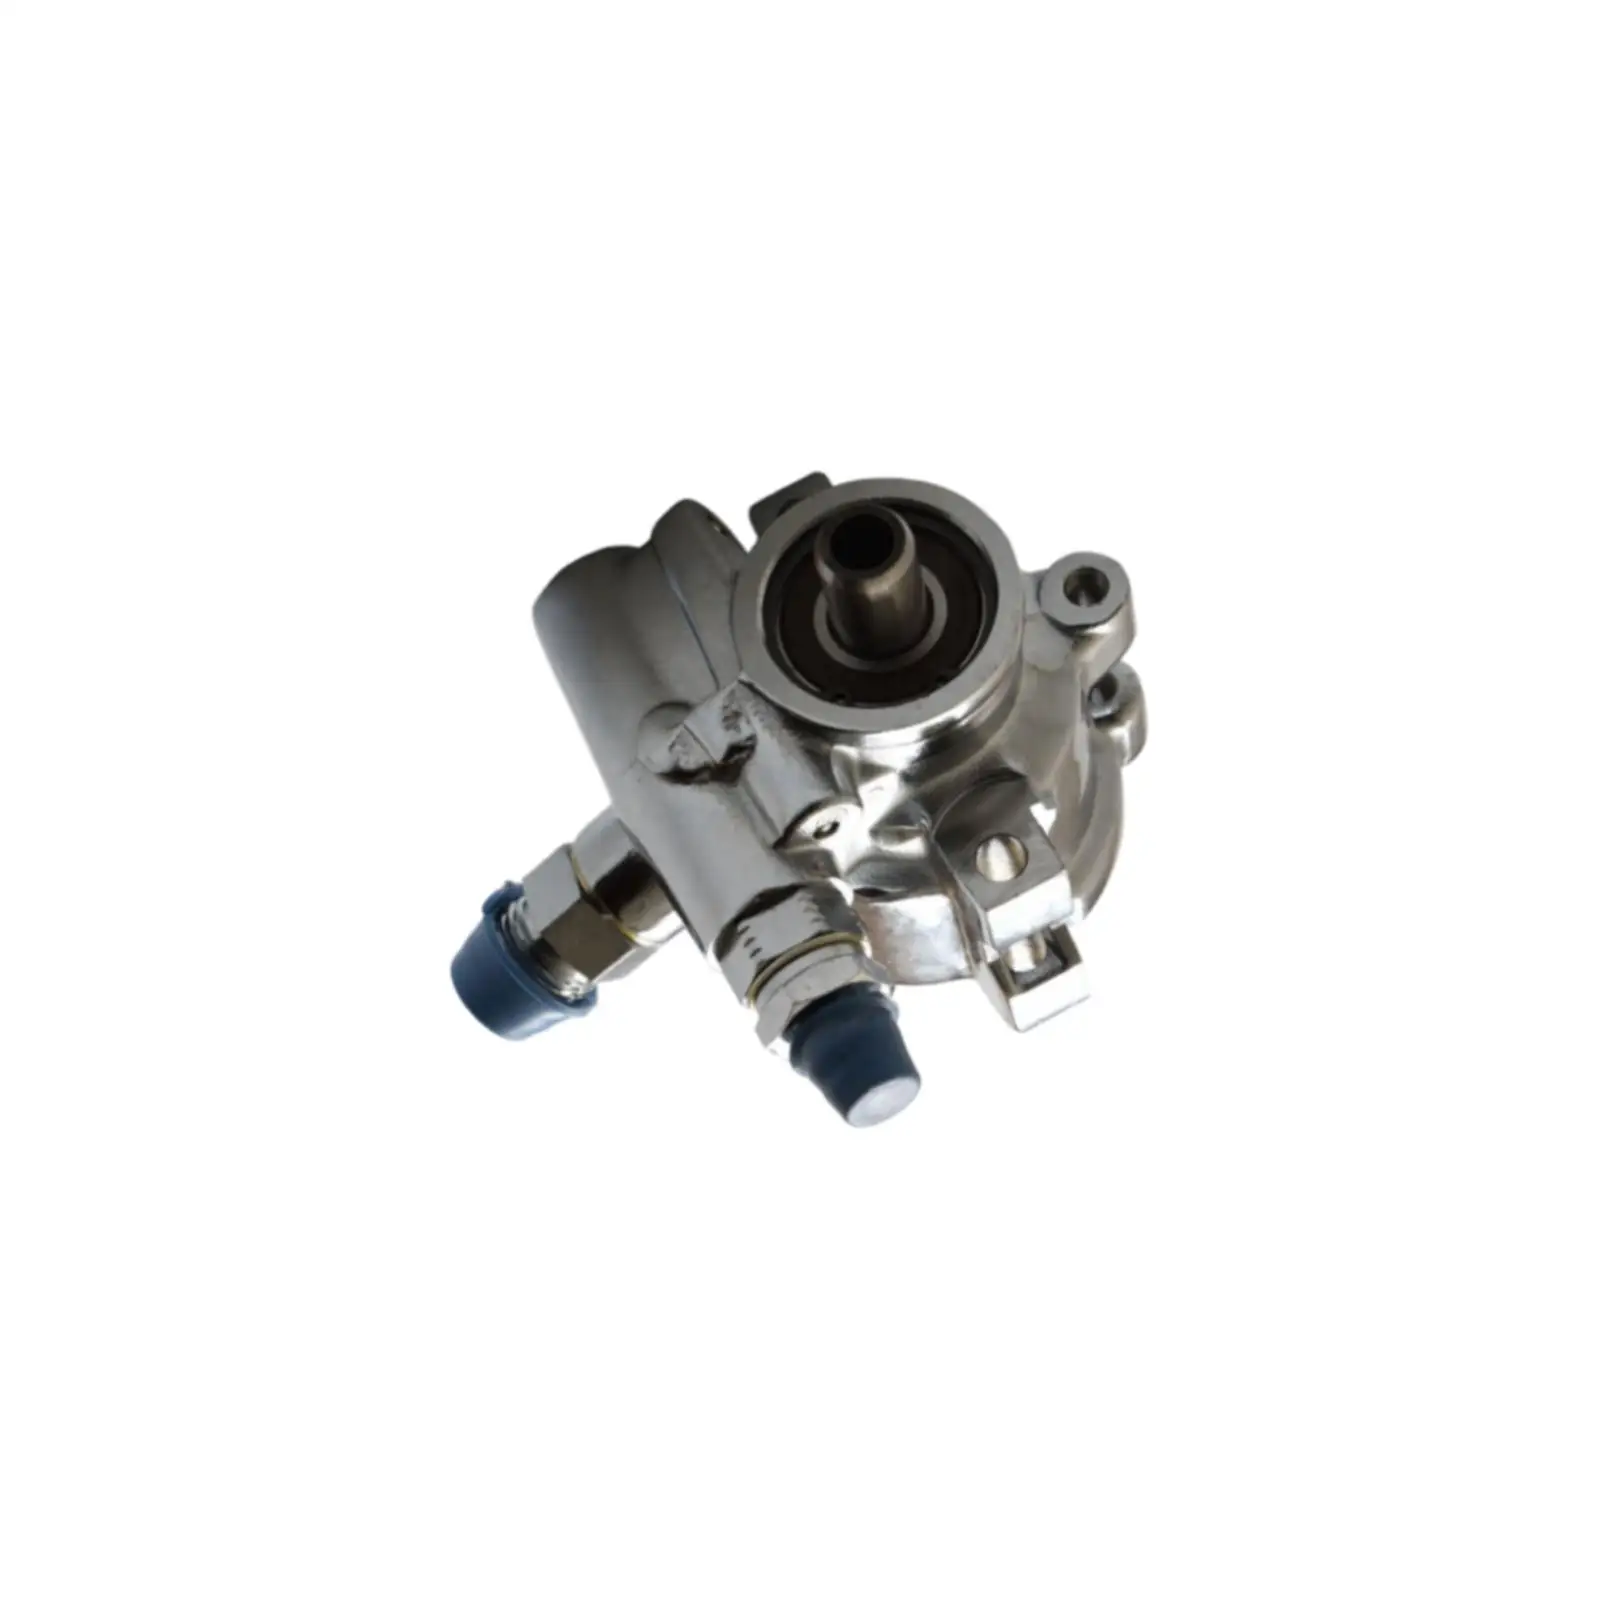 Power Steering Pump Durable Replacement Car Accessories for Type 2 Professional Sturdy Easy to Install High Performance